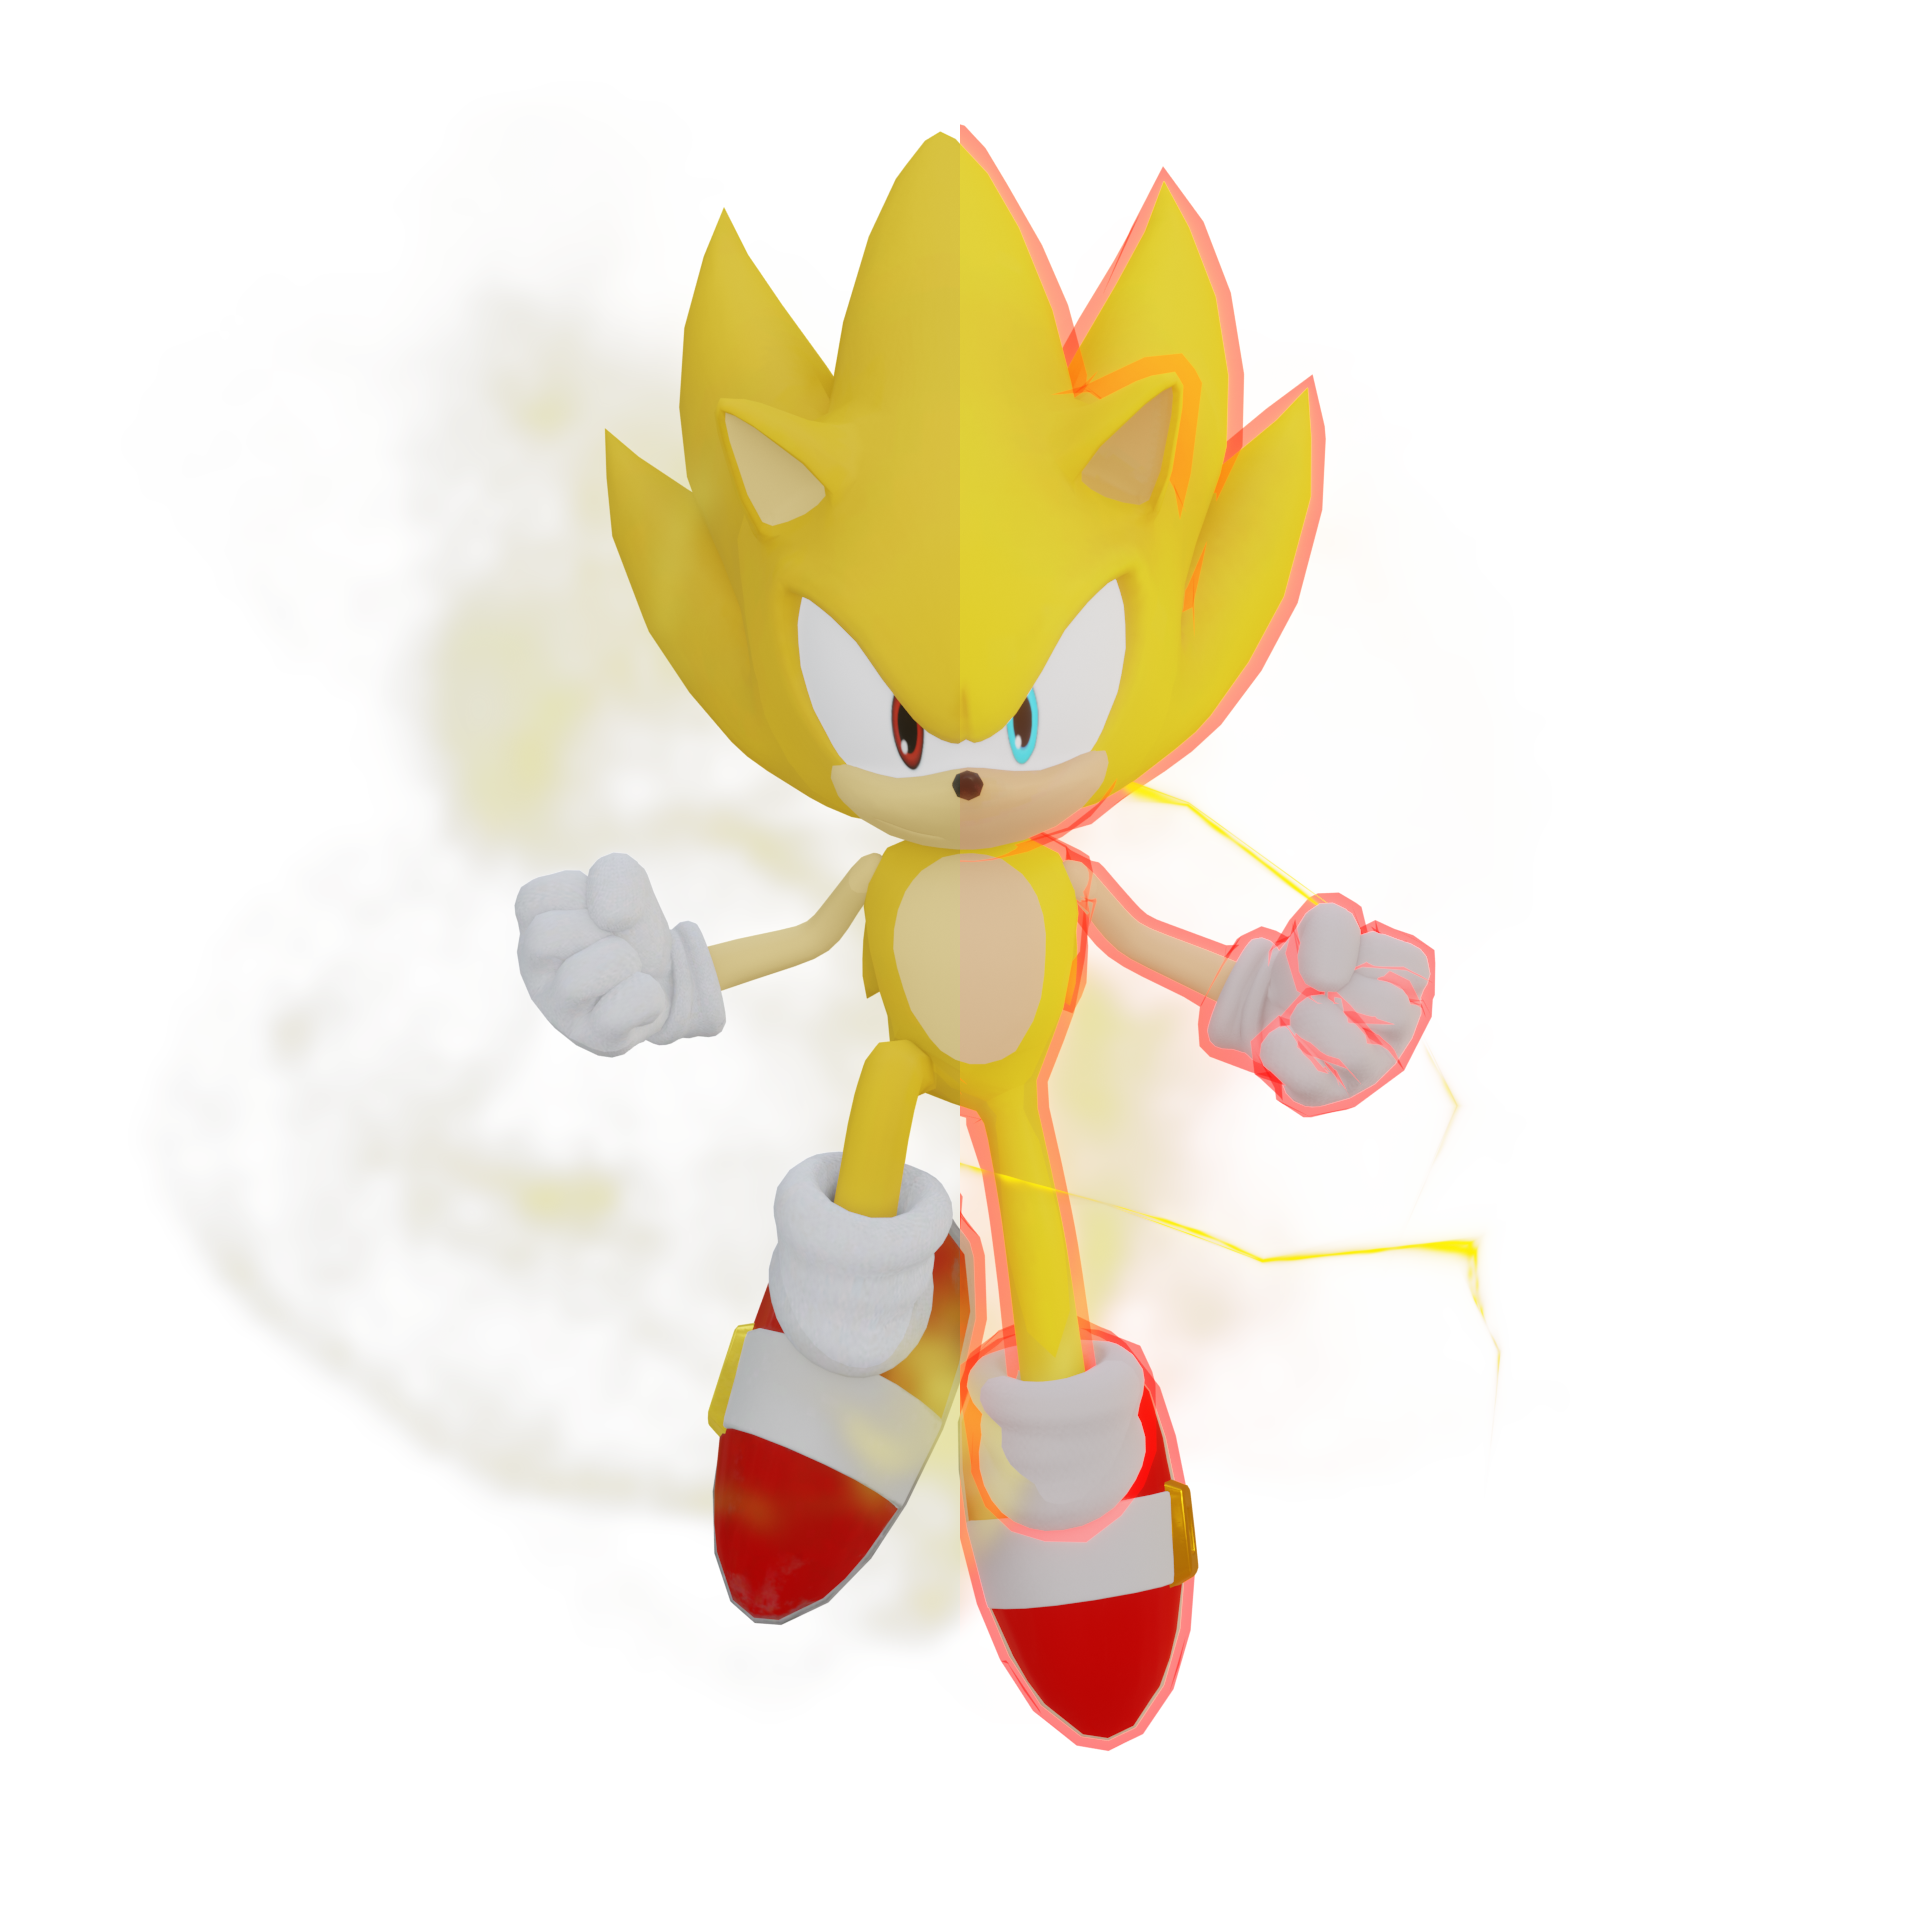 Super Sonic 2 is UNREAL 